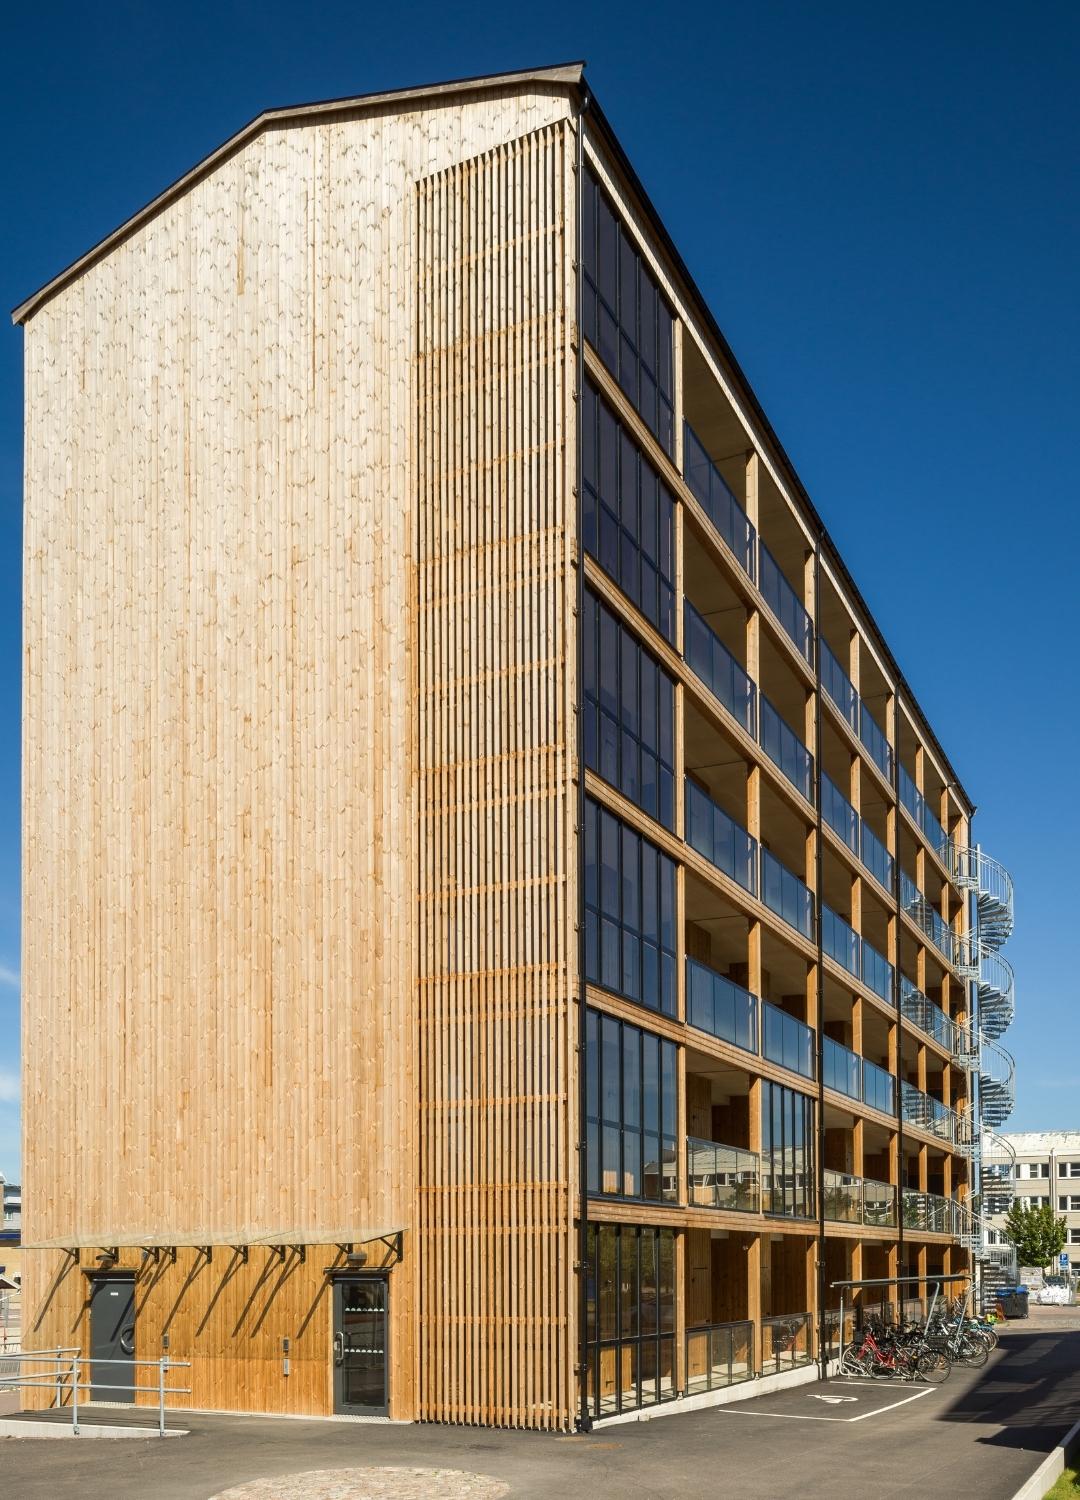 The future will be built using wood  - modules from Moelven Byggmodul AB